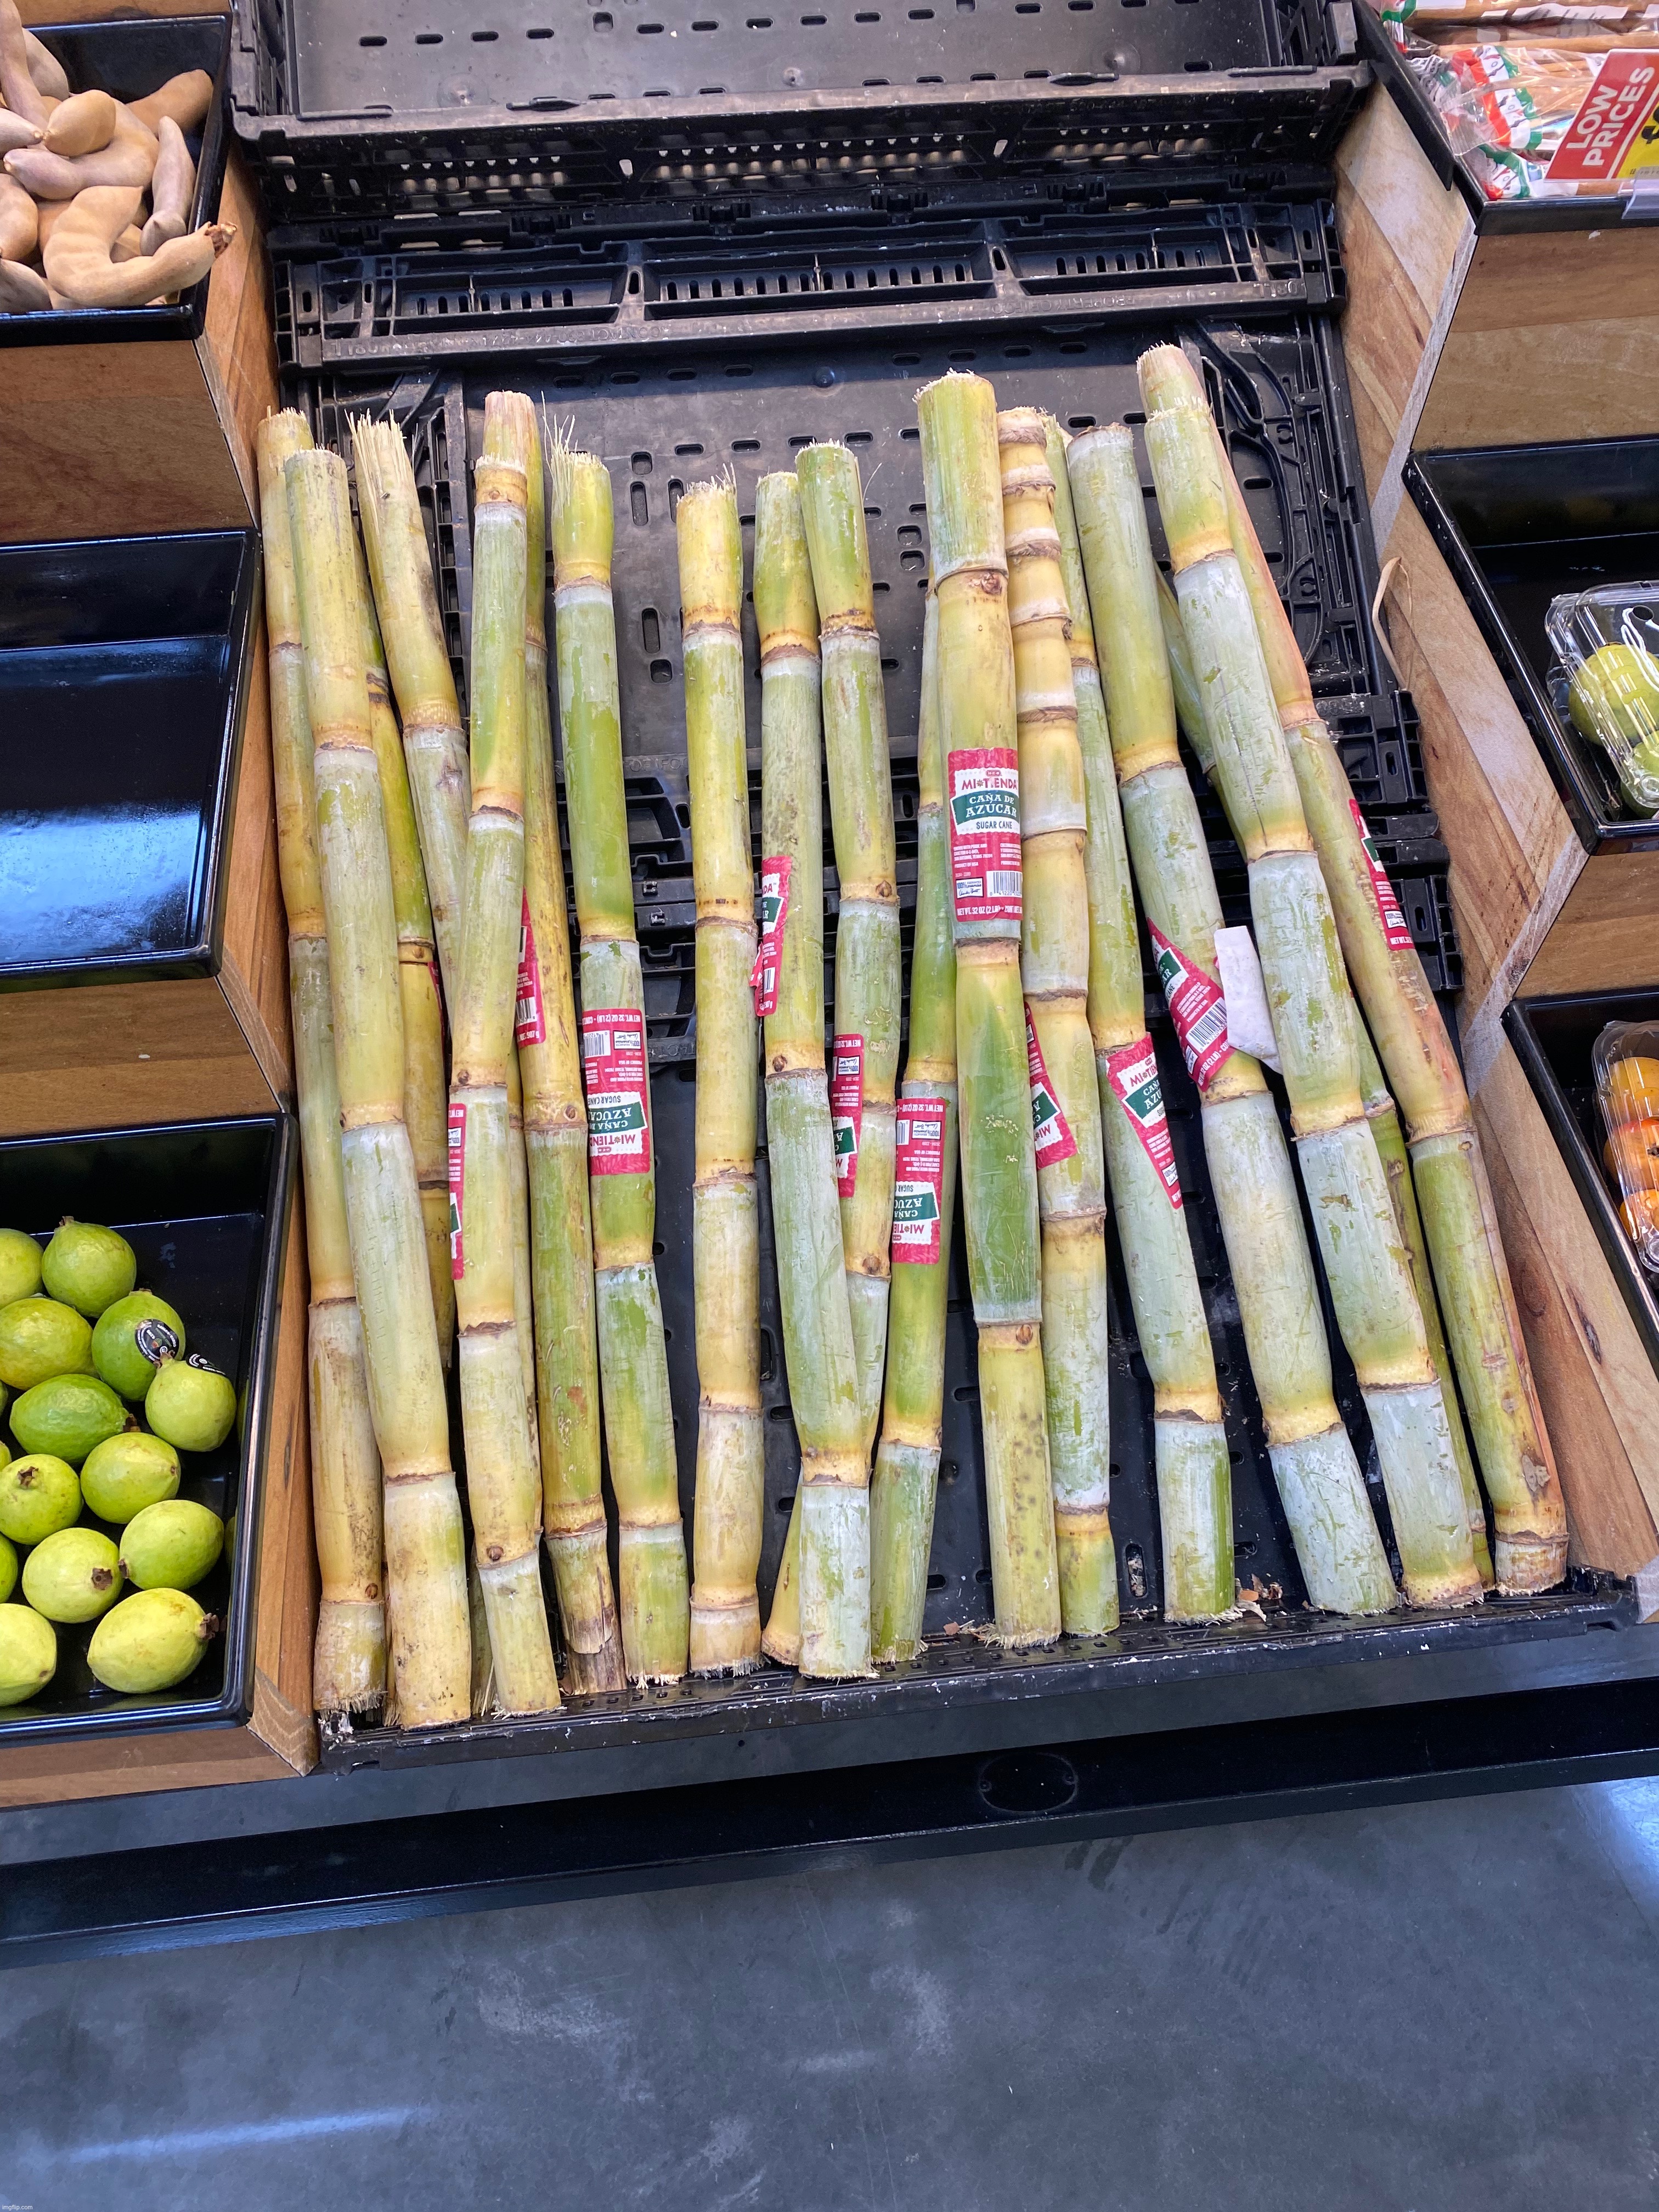 Sugar cane at a grocery store, Laredo TX 12/21/22 | made w/ Imgflip meme maker